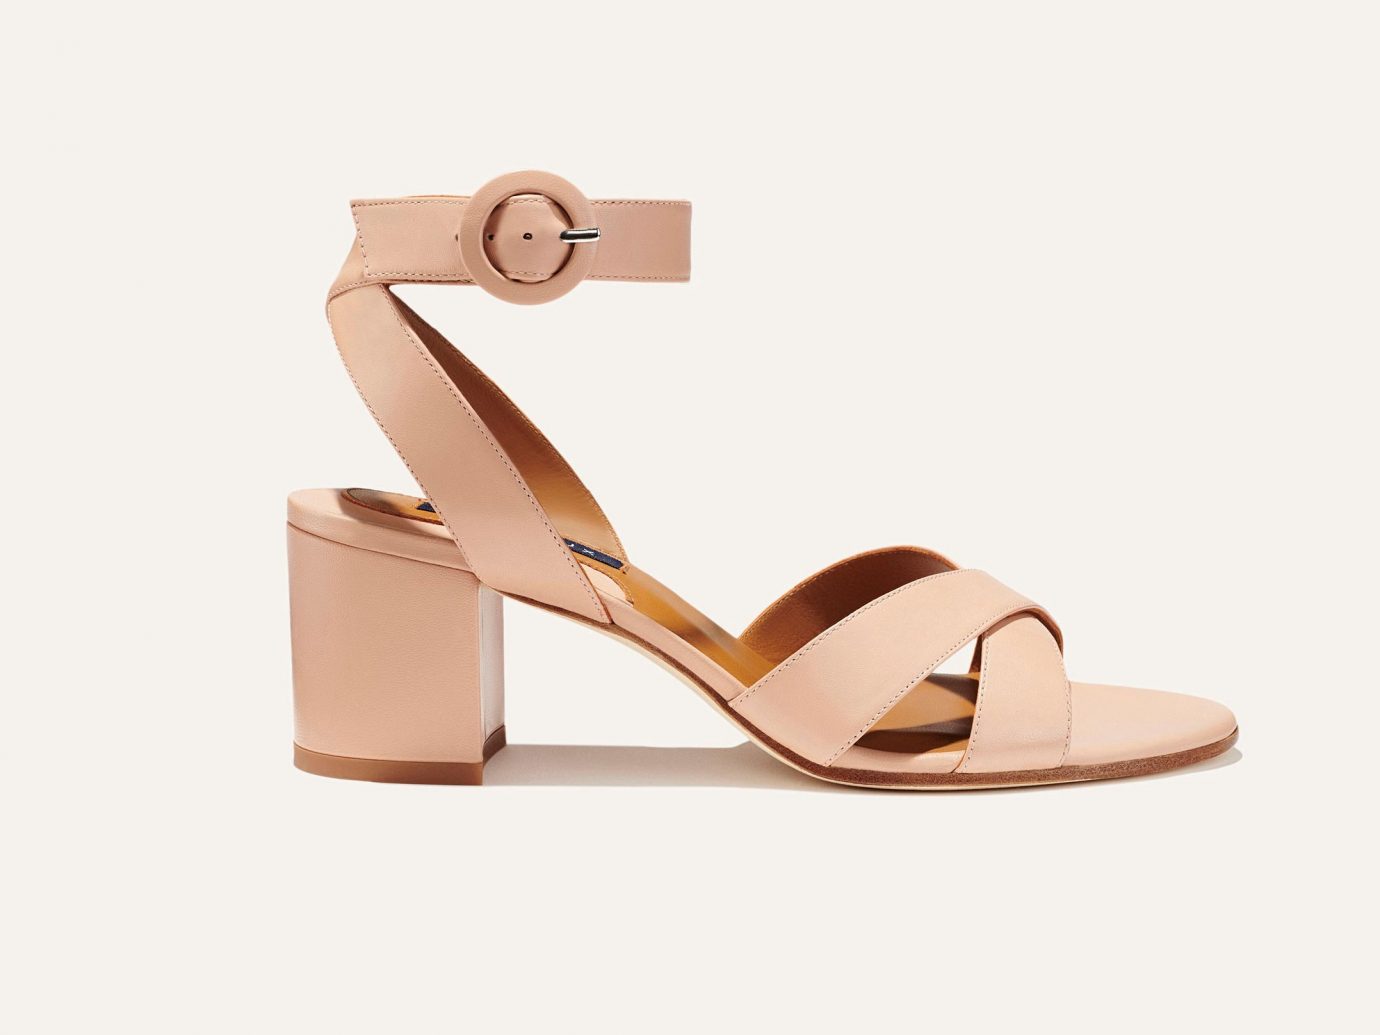 Marguax The City Sandal